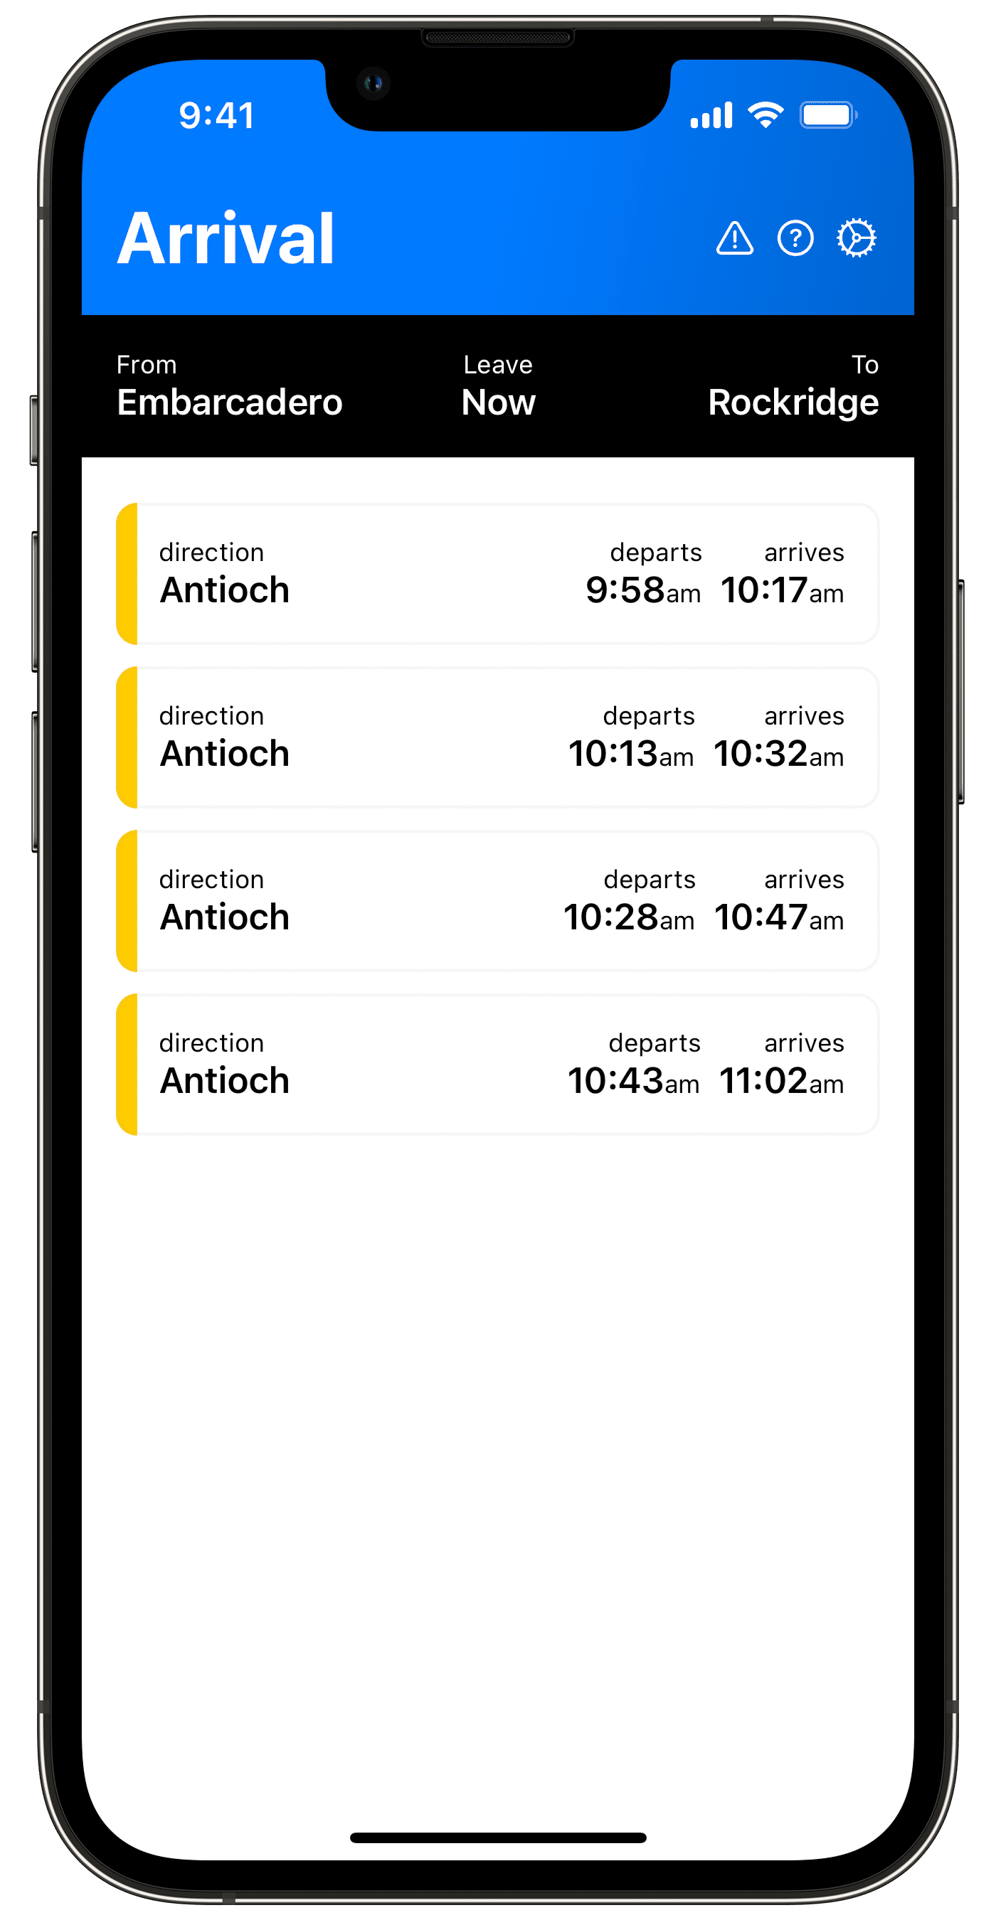 Trip options displayed on the Arrival BART app.